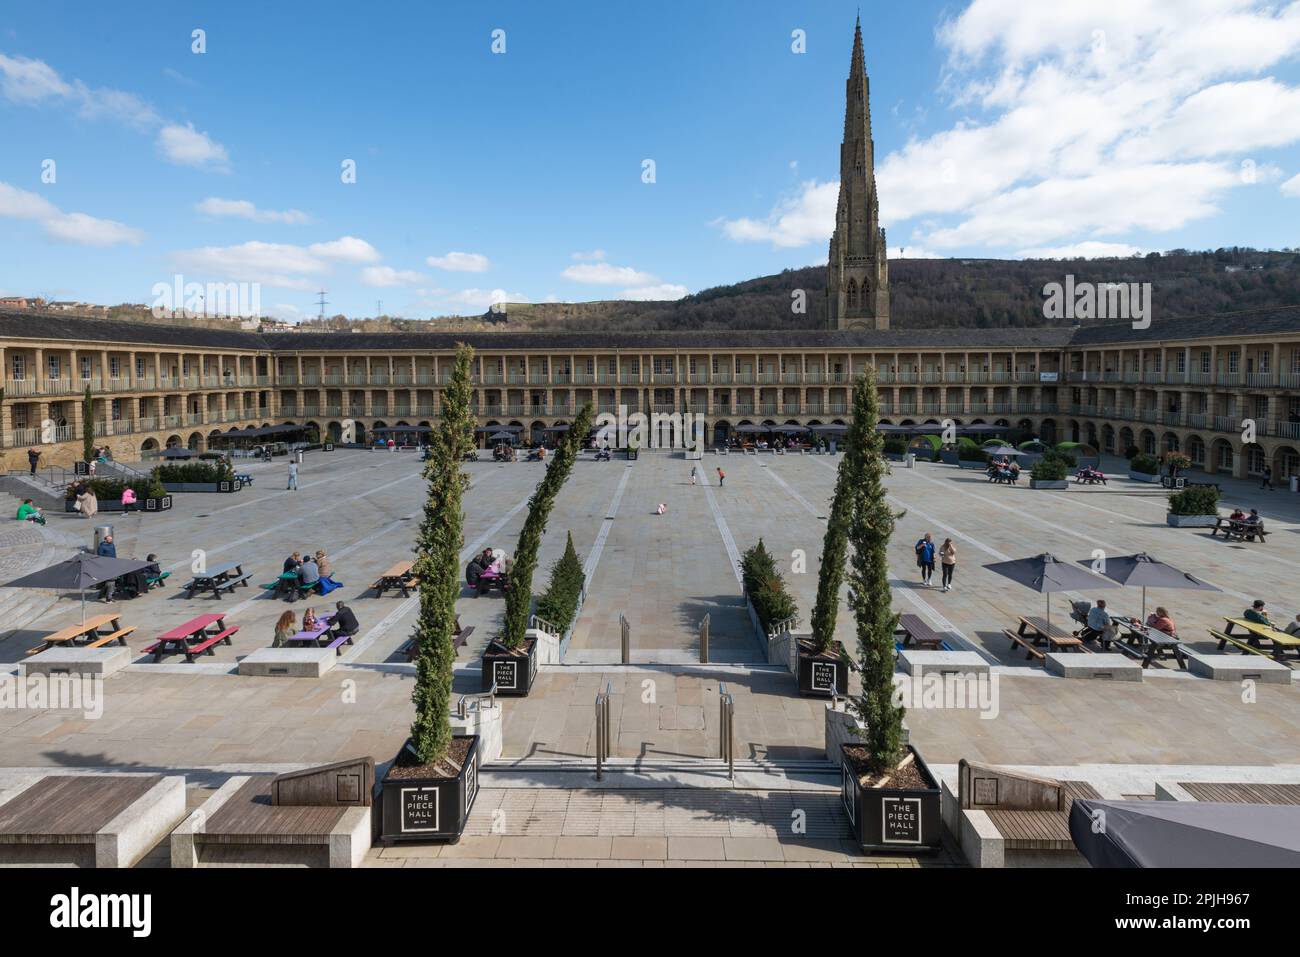 The Piece Hall, Halifax, West Yorkshire, 2 aprile 2023. Foto Stock